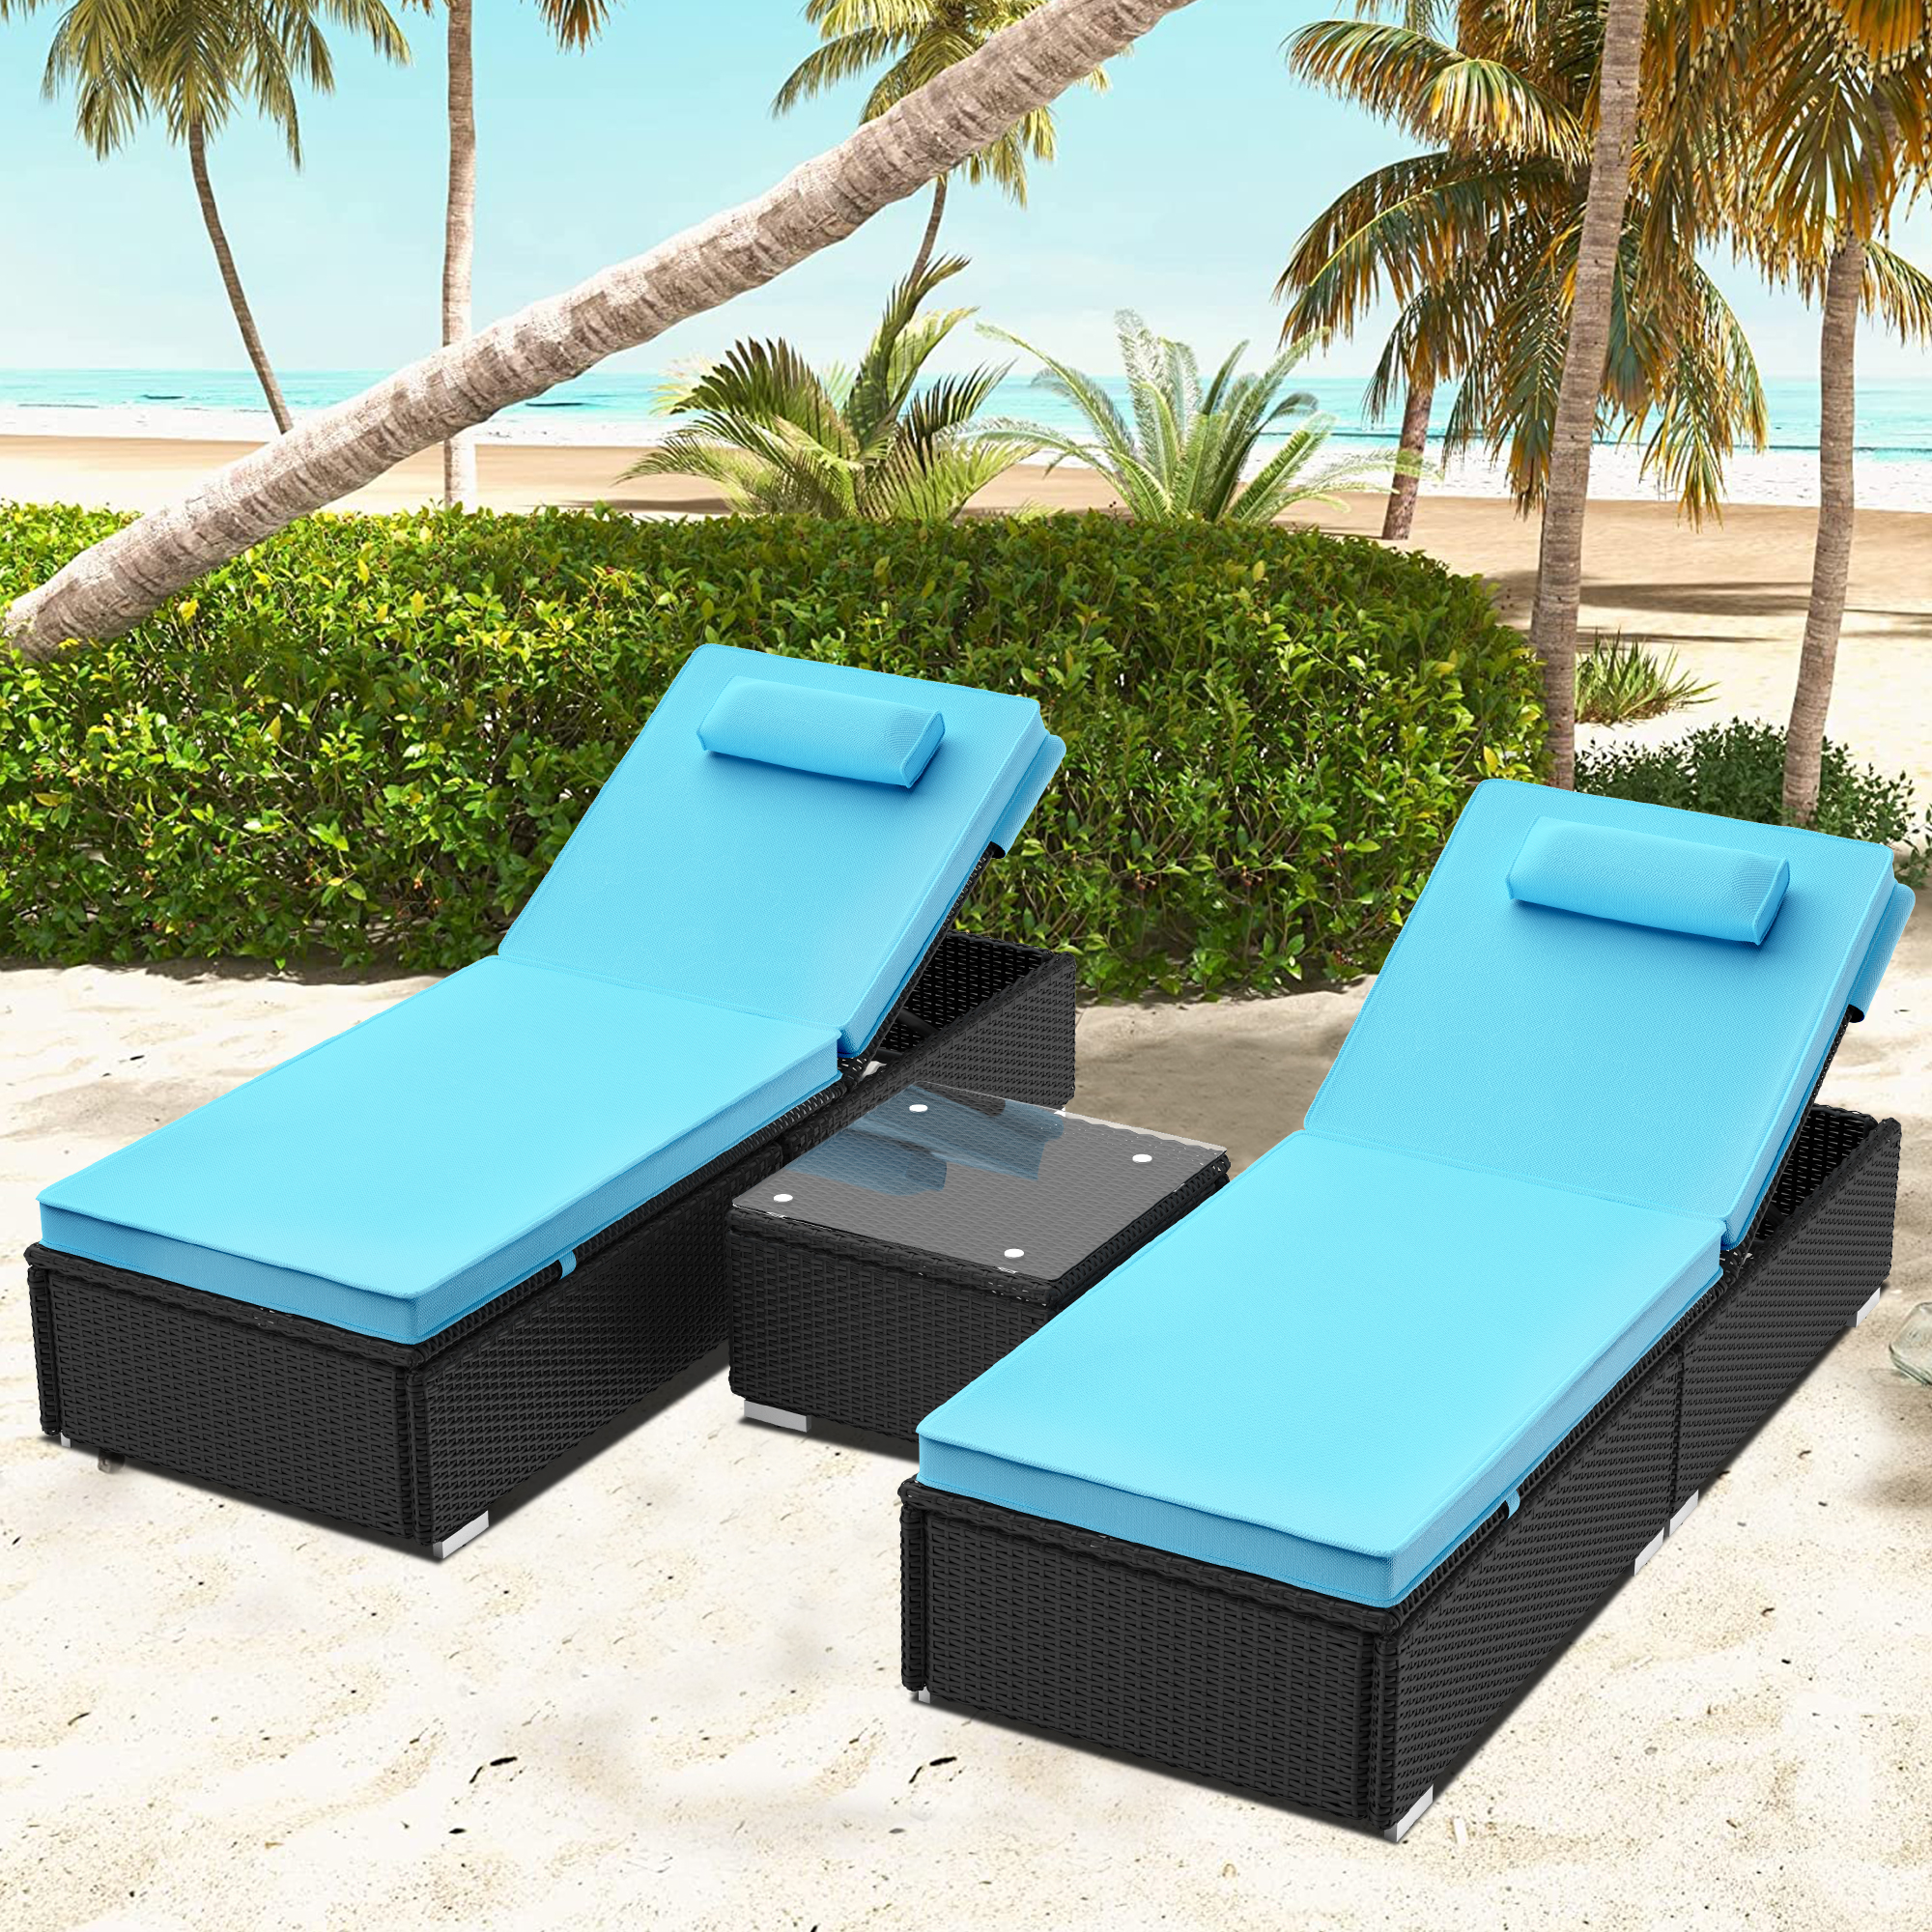 SESSLIFE 2 PCS Lounge Chair for Outside, Adjustable 5 Position Rattan Wicker Outdoor Chaise Lounge with Head Pillow & Thickened Cushion for Poolside, Patio, Garden, Deck (2, Light Blue) - image 1 of 8